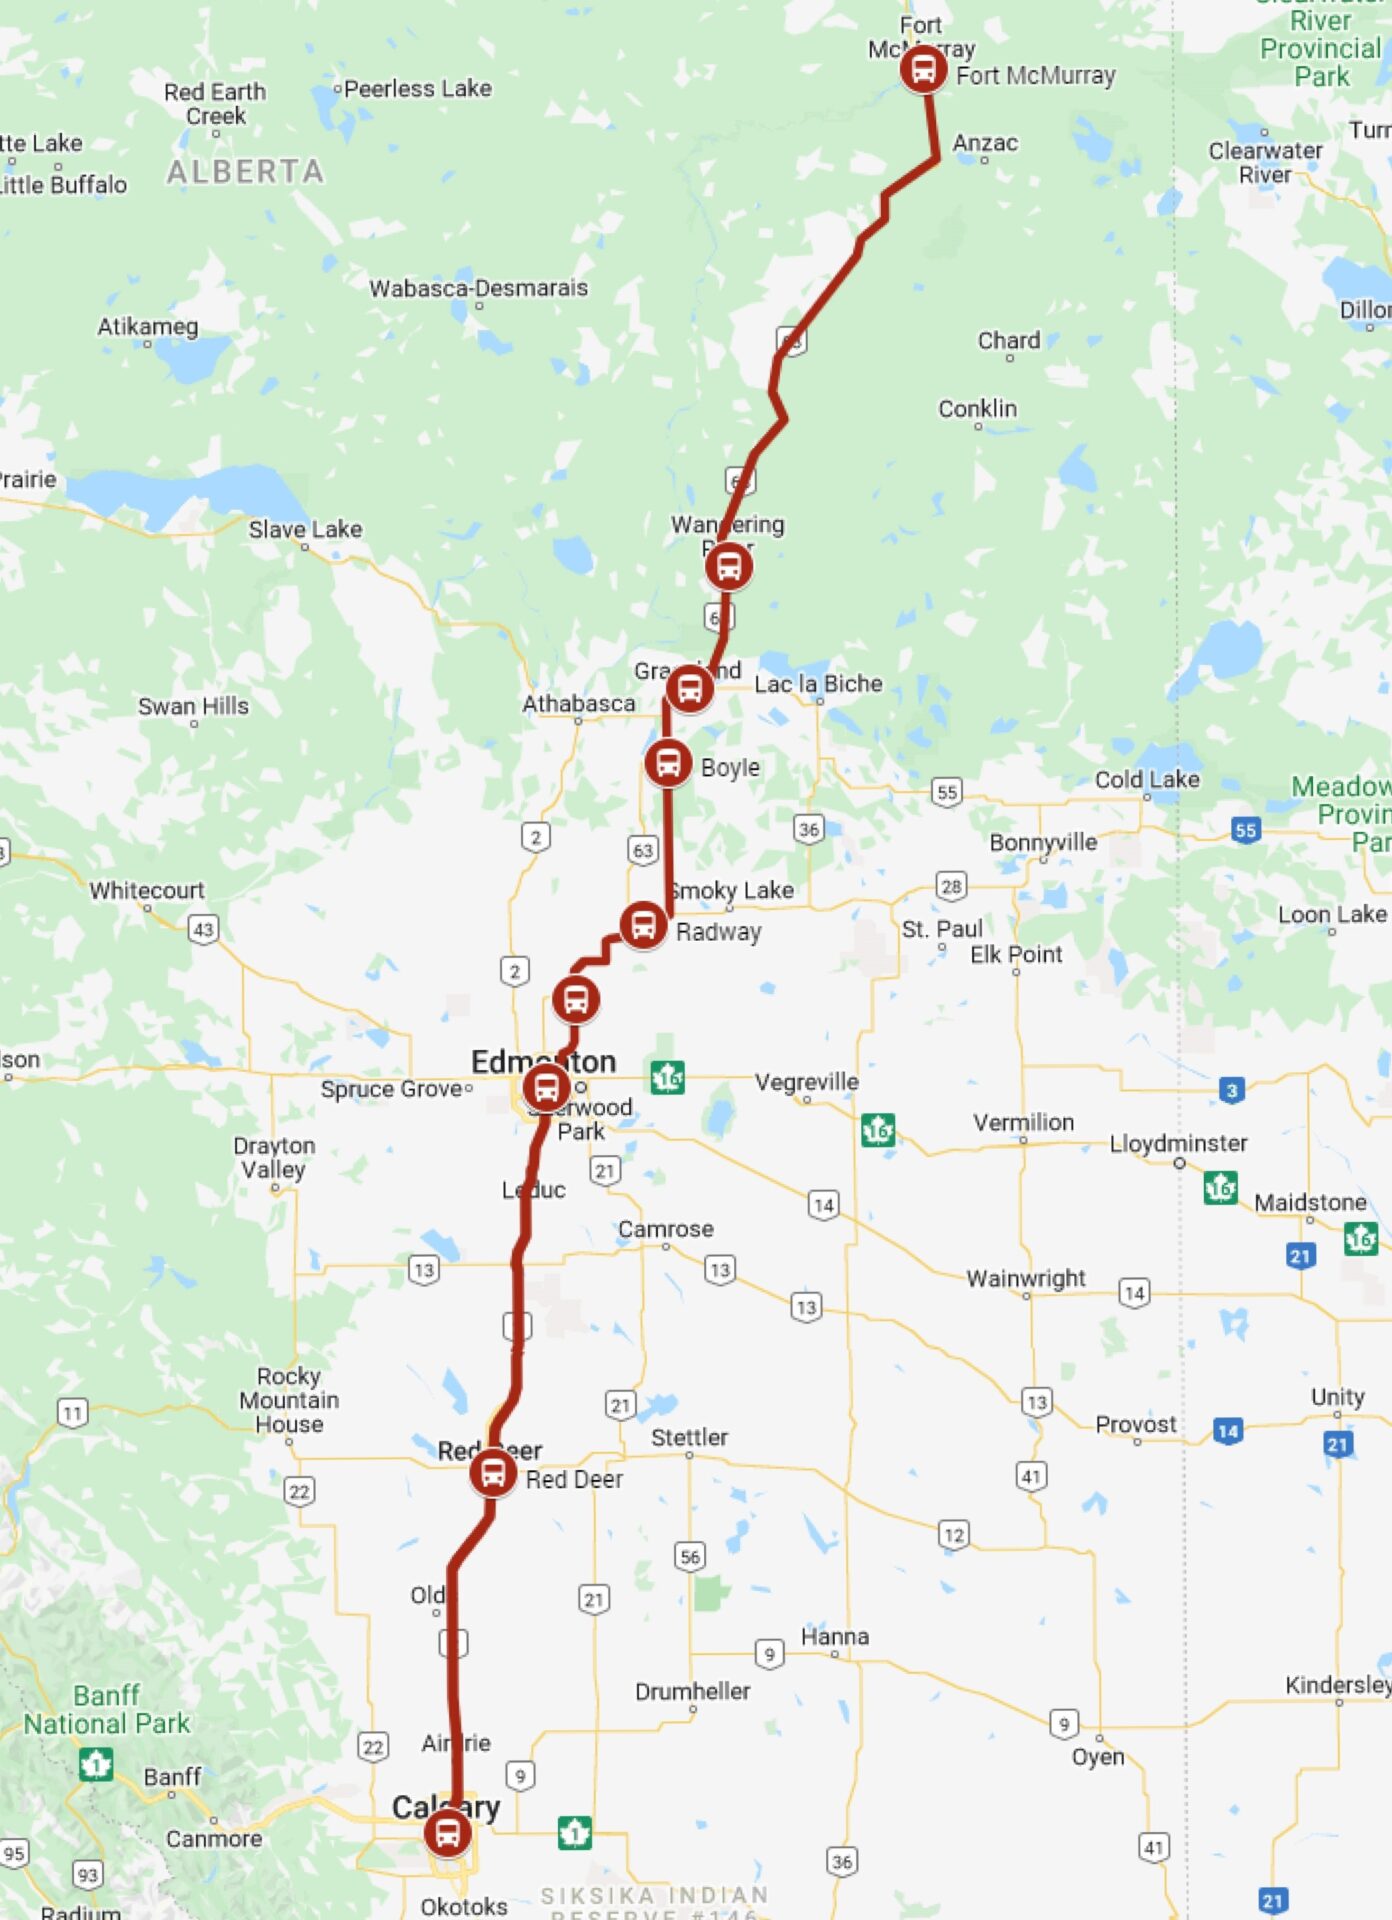 Fort McMurray to Calgary - Red Arrow